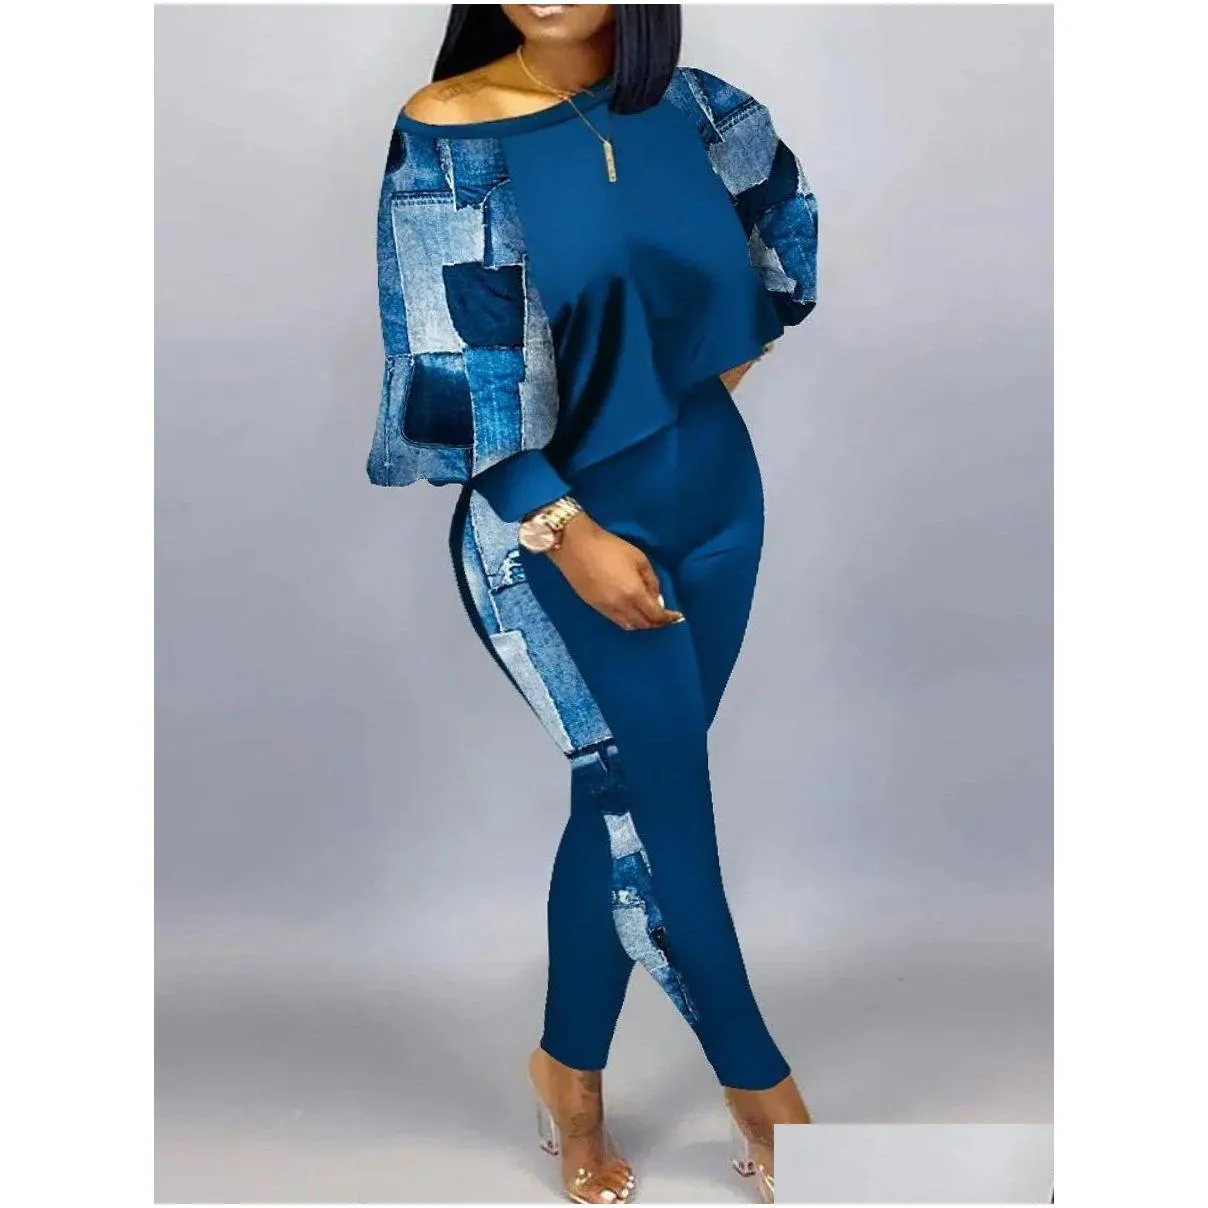 lw Plus Size Lantern Sleeve Gradient Print Skinny Pants Set New In Women Spring Summer High Elasticity 2PC Tracksuits Outfits w2J7#